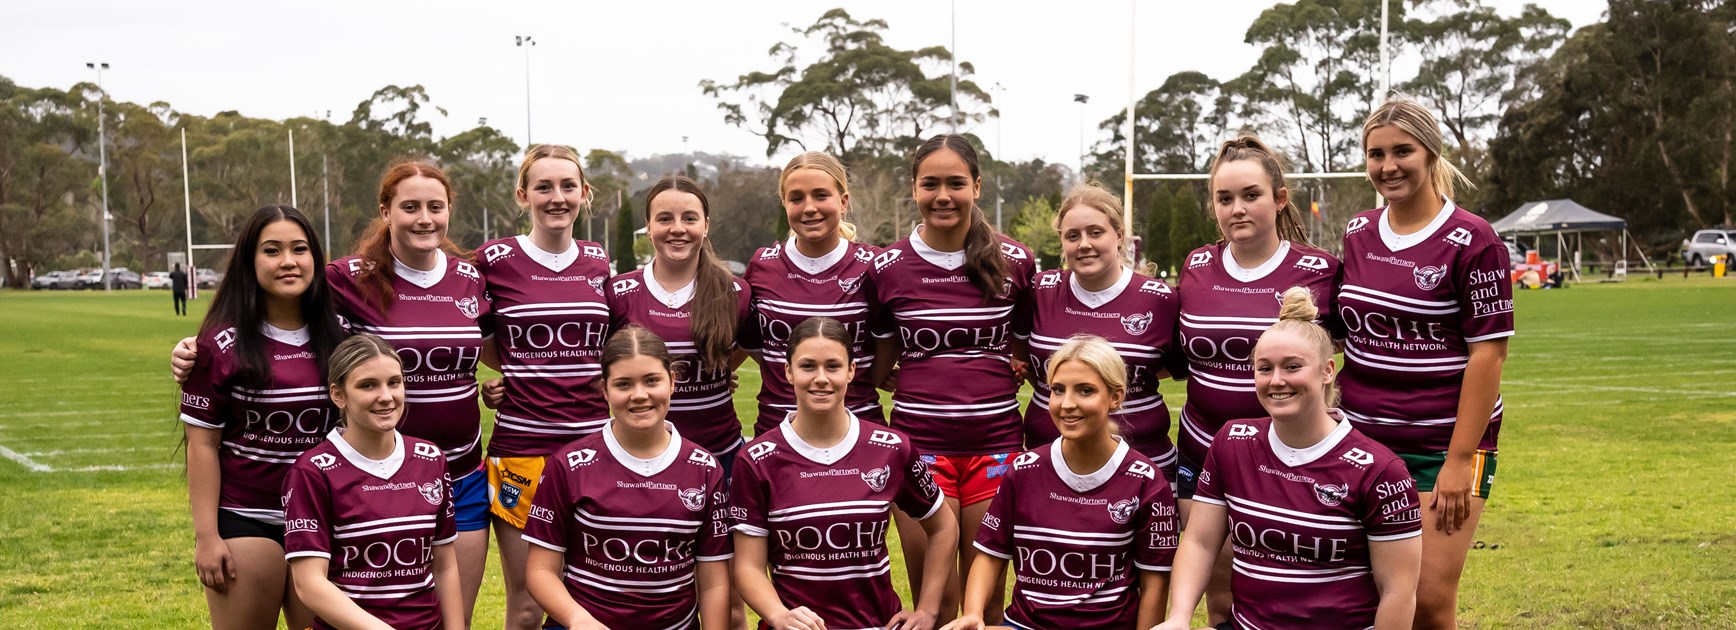 Some of the girls from the Manly junior development squad and Tarsha Gale Cup triallists at Narrabeen on Wednesday.